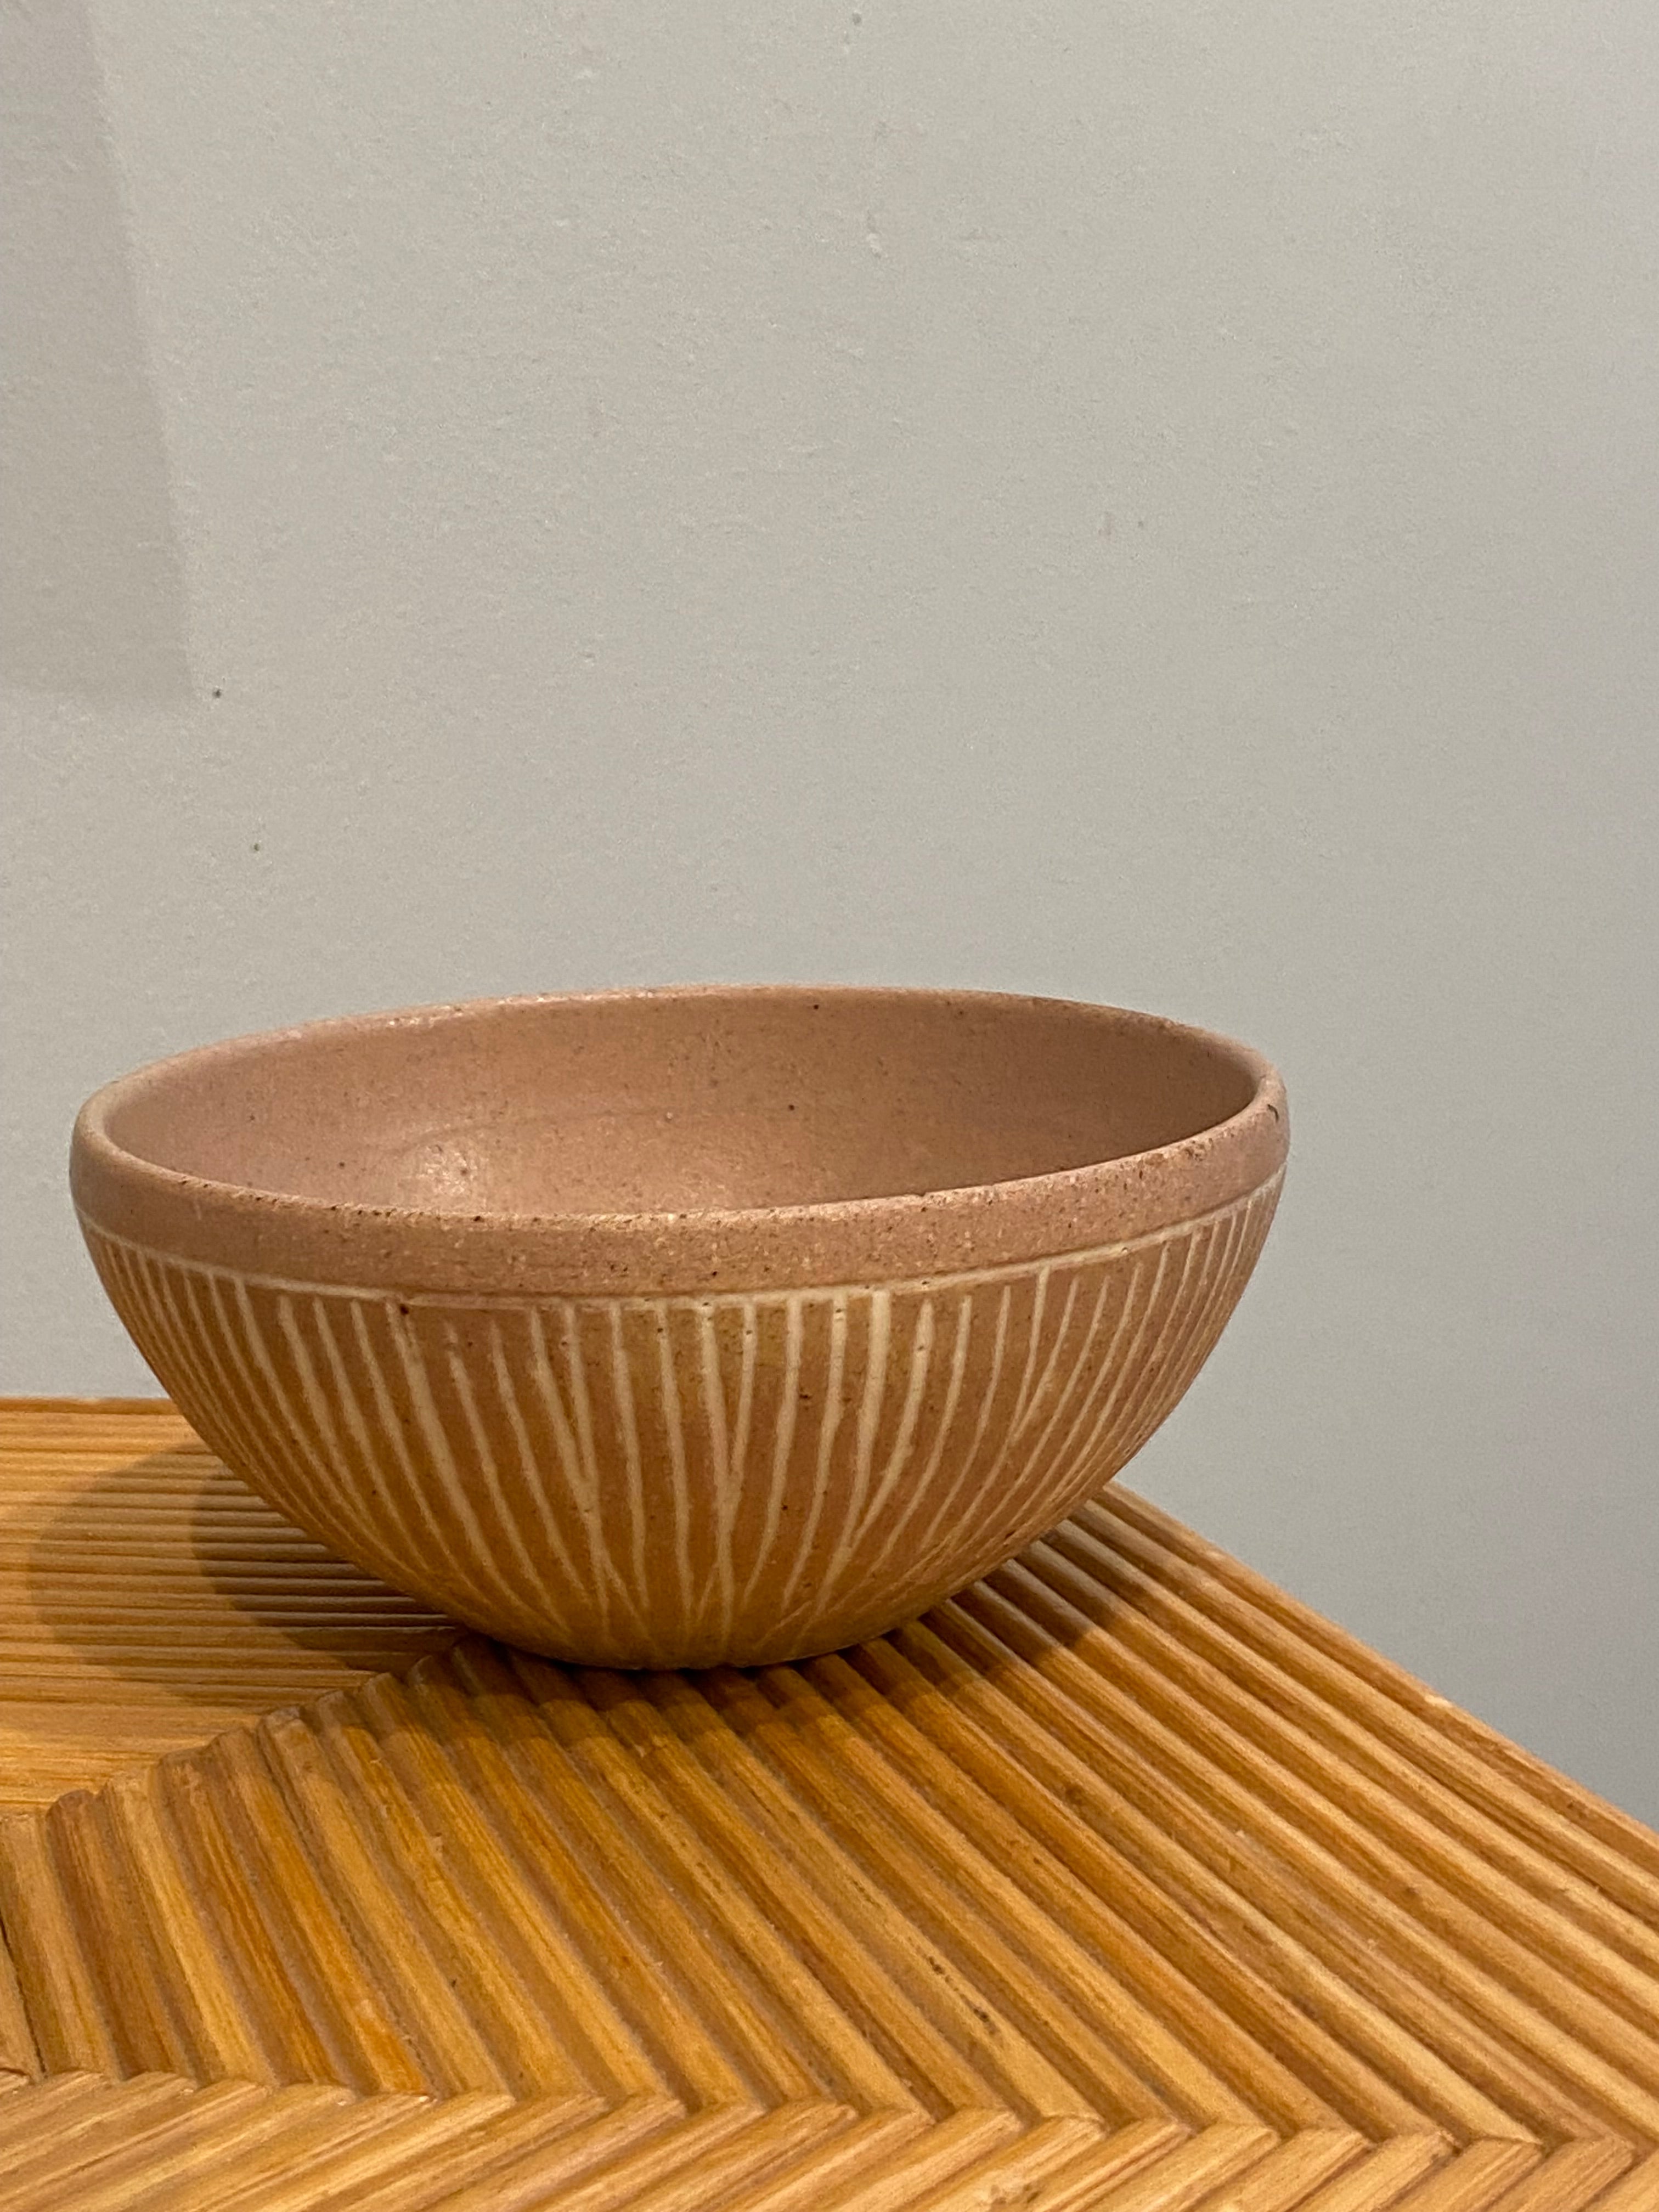 Pink bowl with white grooves